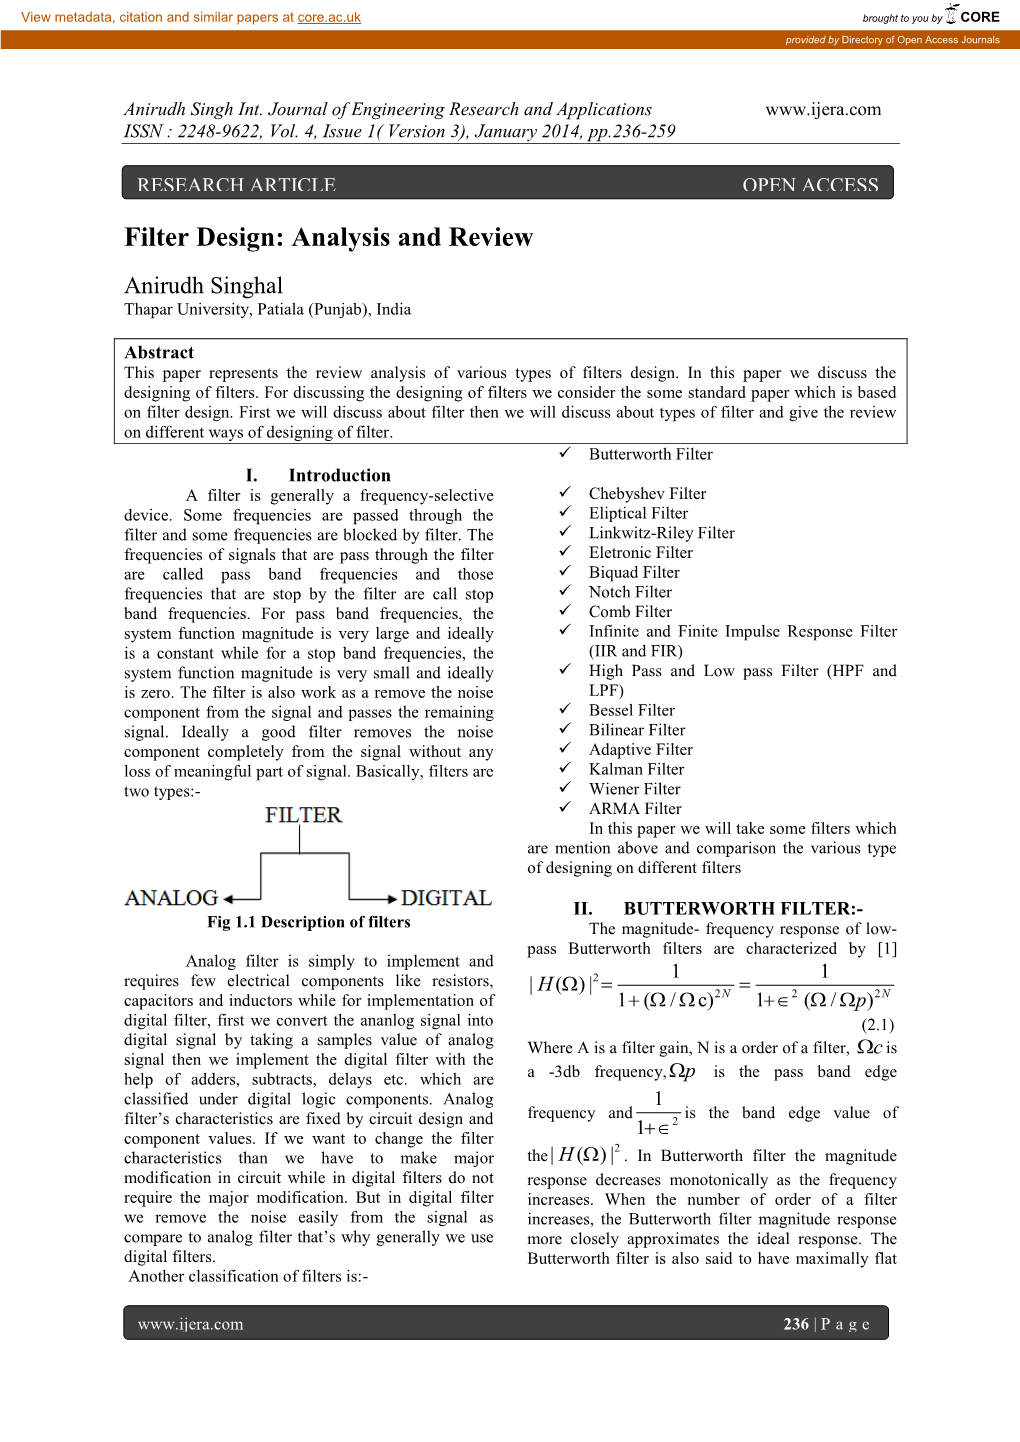 Filter Design: Analysis and Review